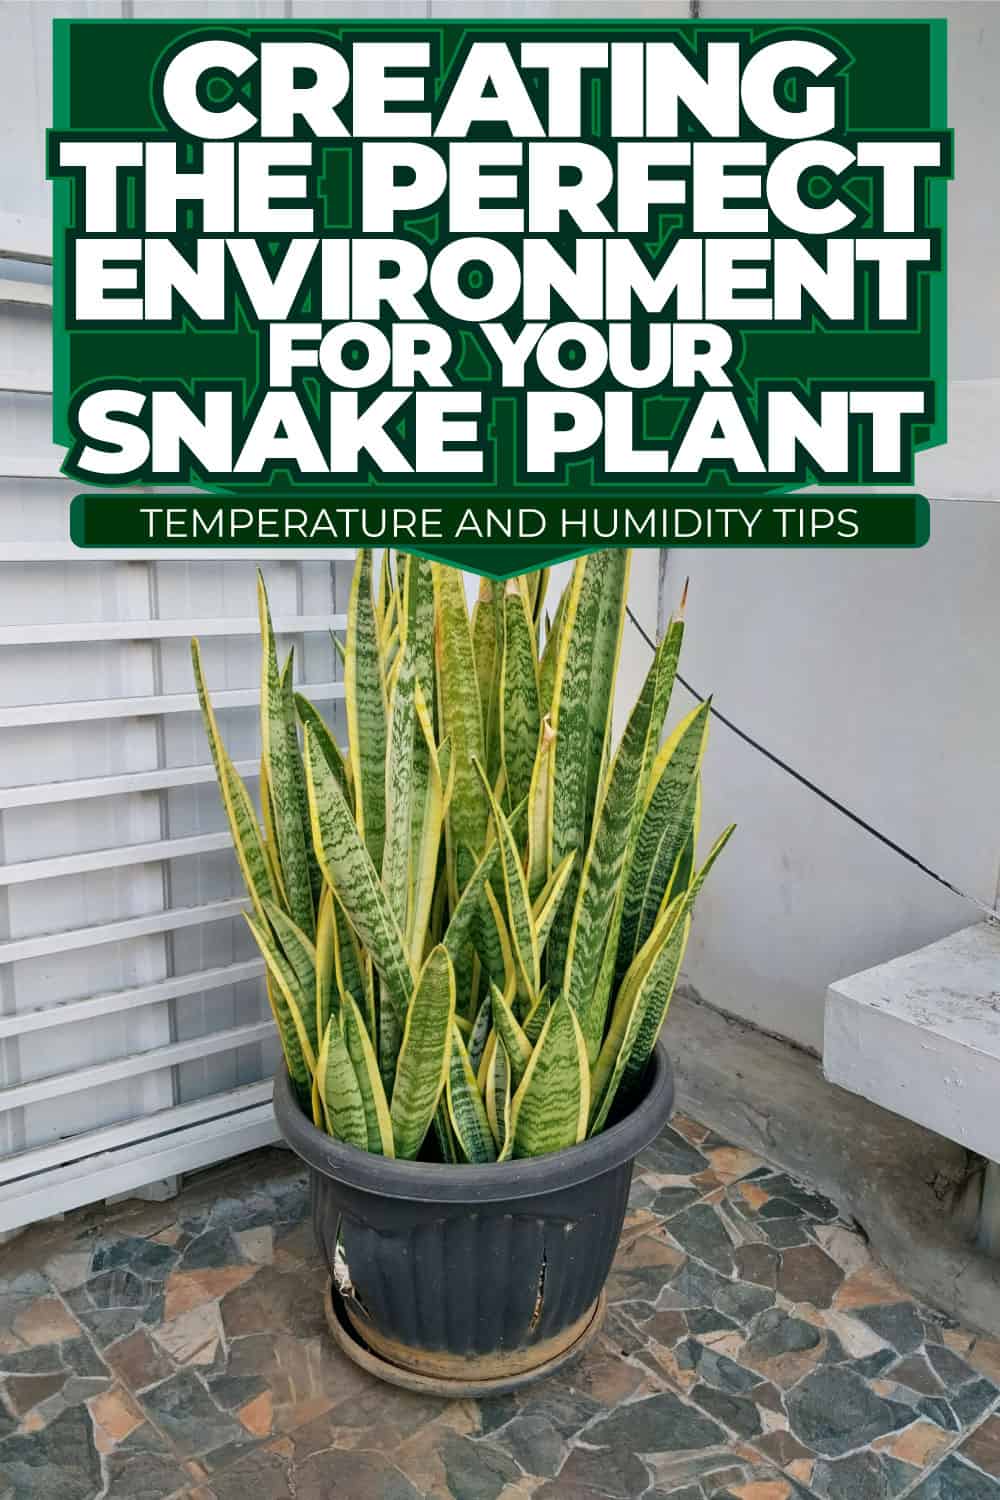 Creating the Perfect Environment for Your Snake Plant: Temperature and Humidity Tips